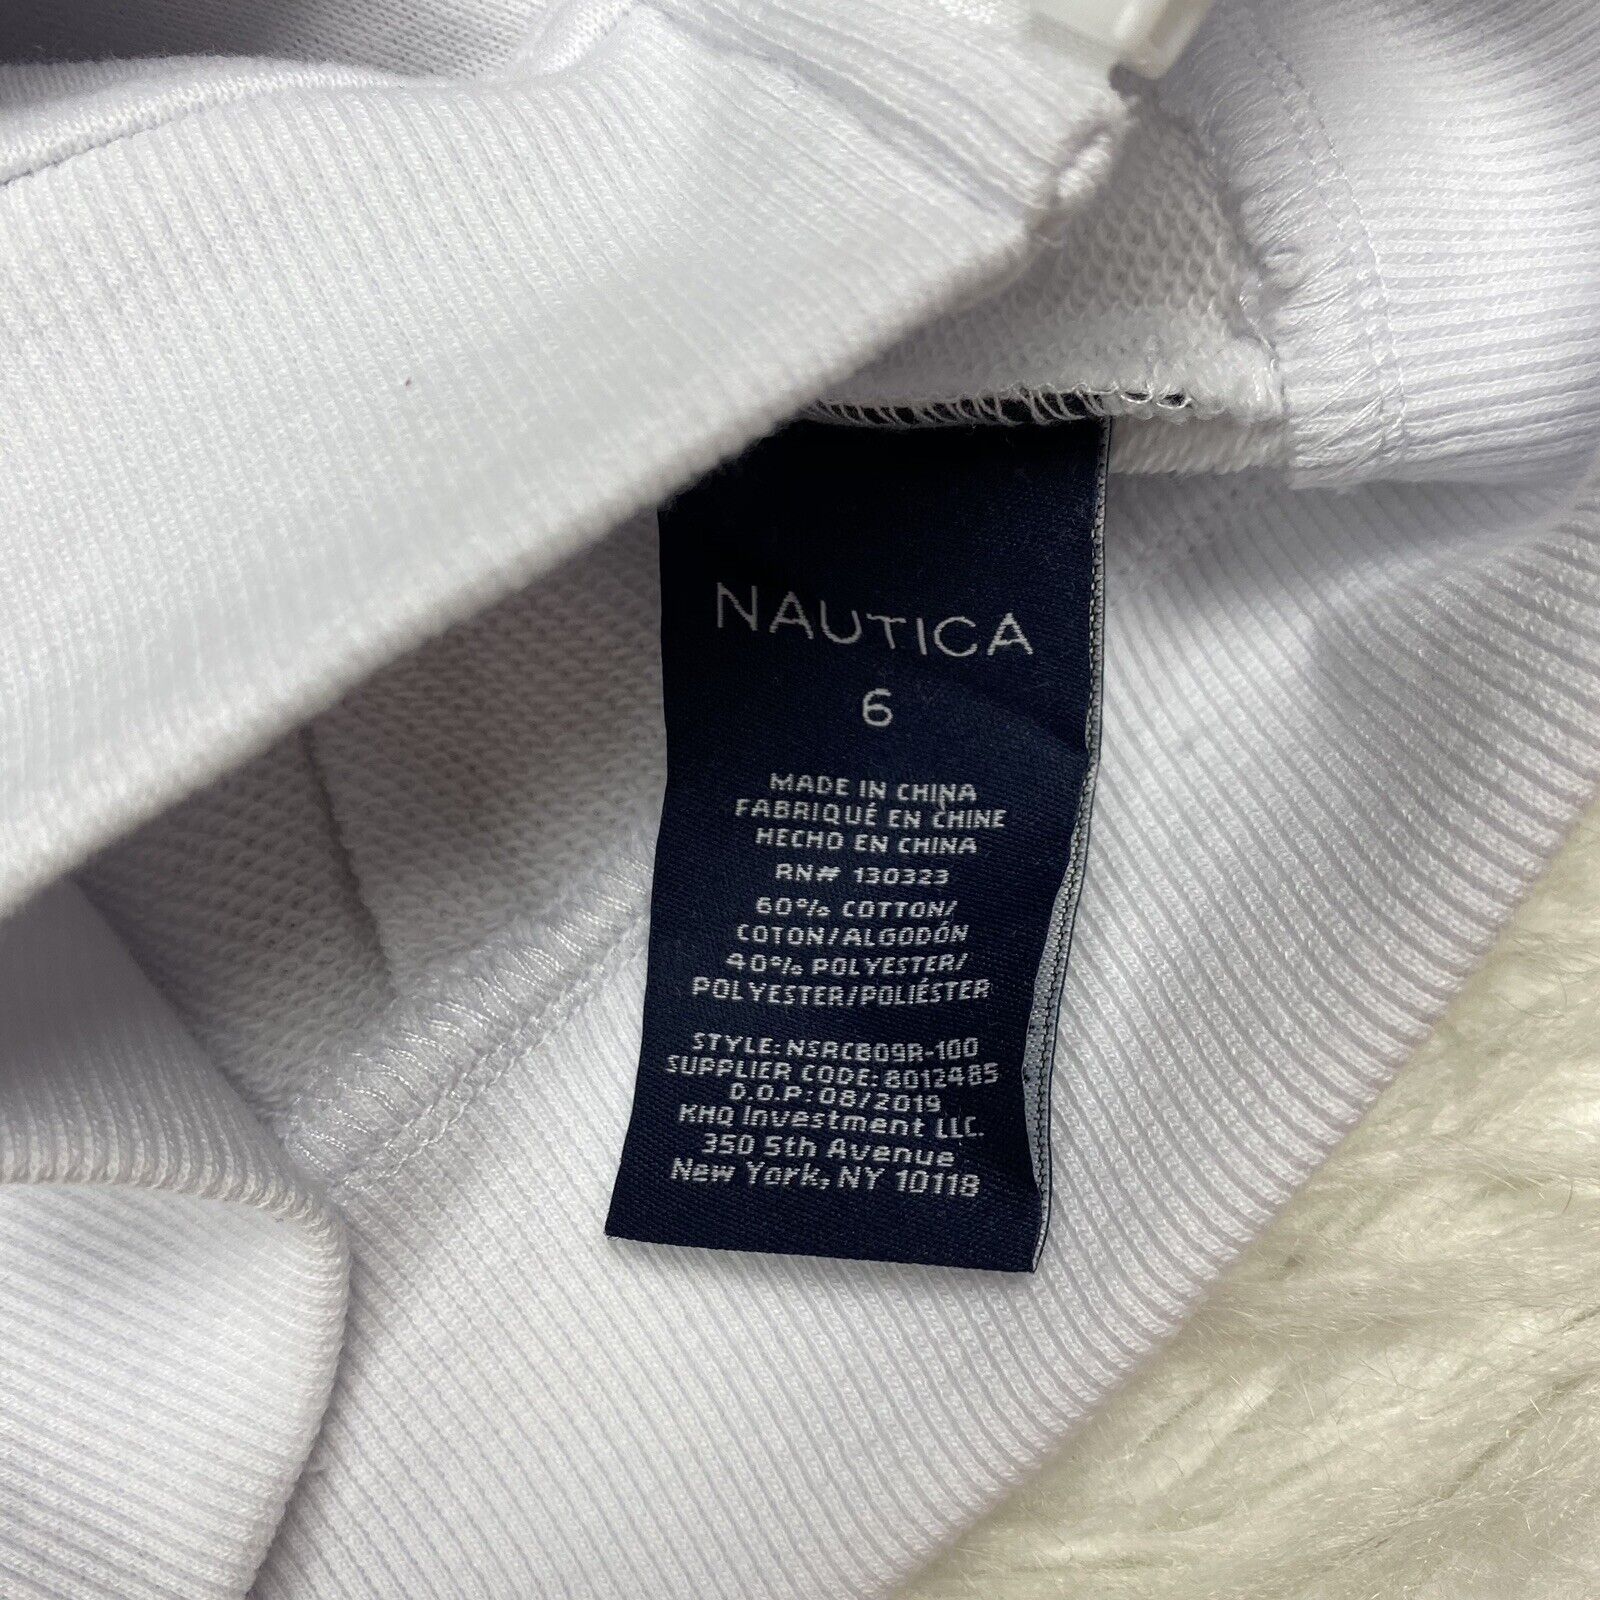 New NAUTICA Hoodie Jacket Zip Up Girl's Size 6 White Floral Graphic School Nautica Does Not Apply - фотография #8